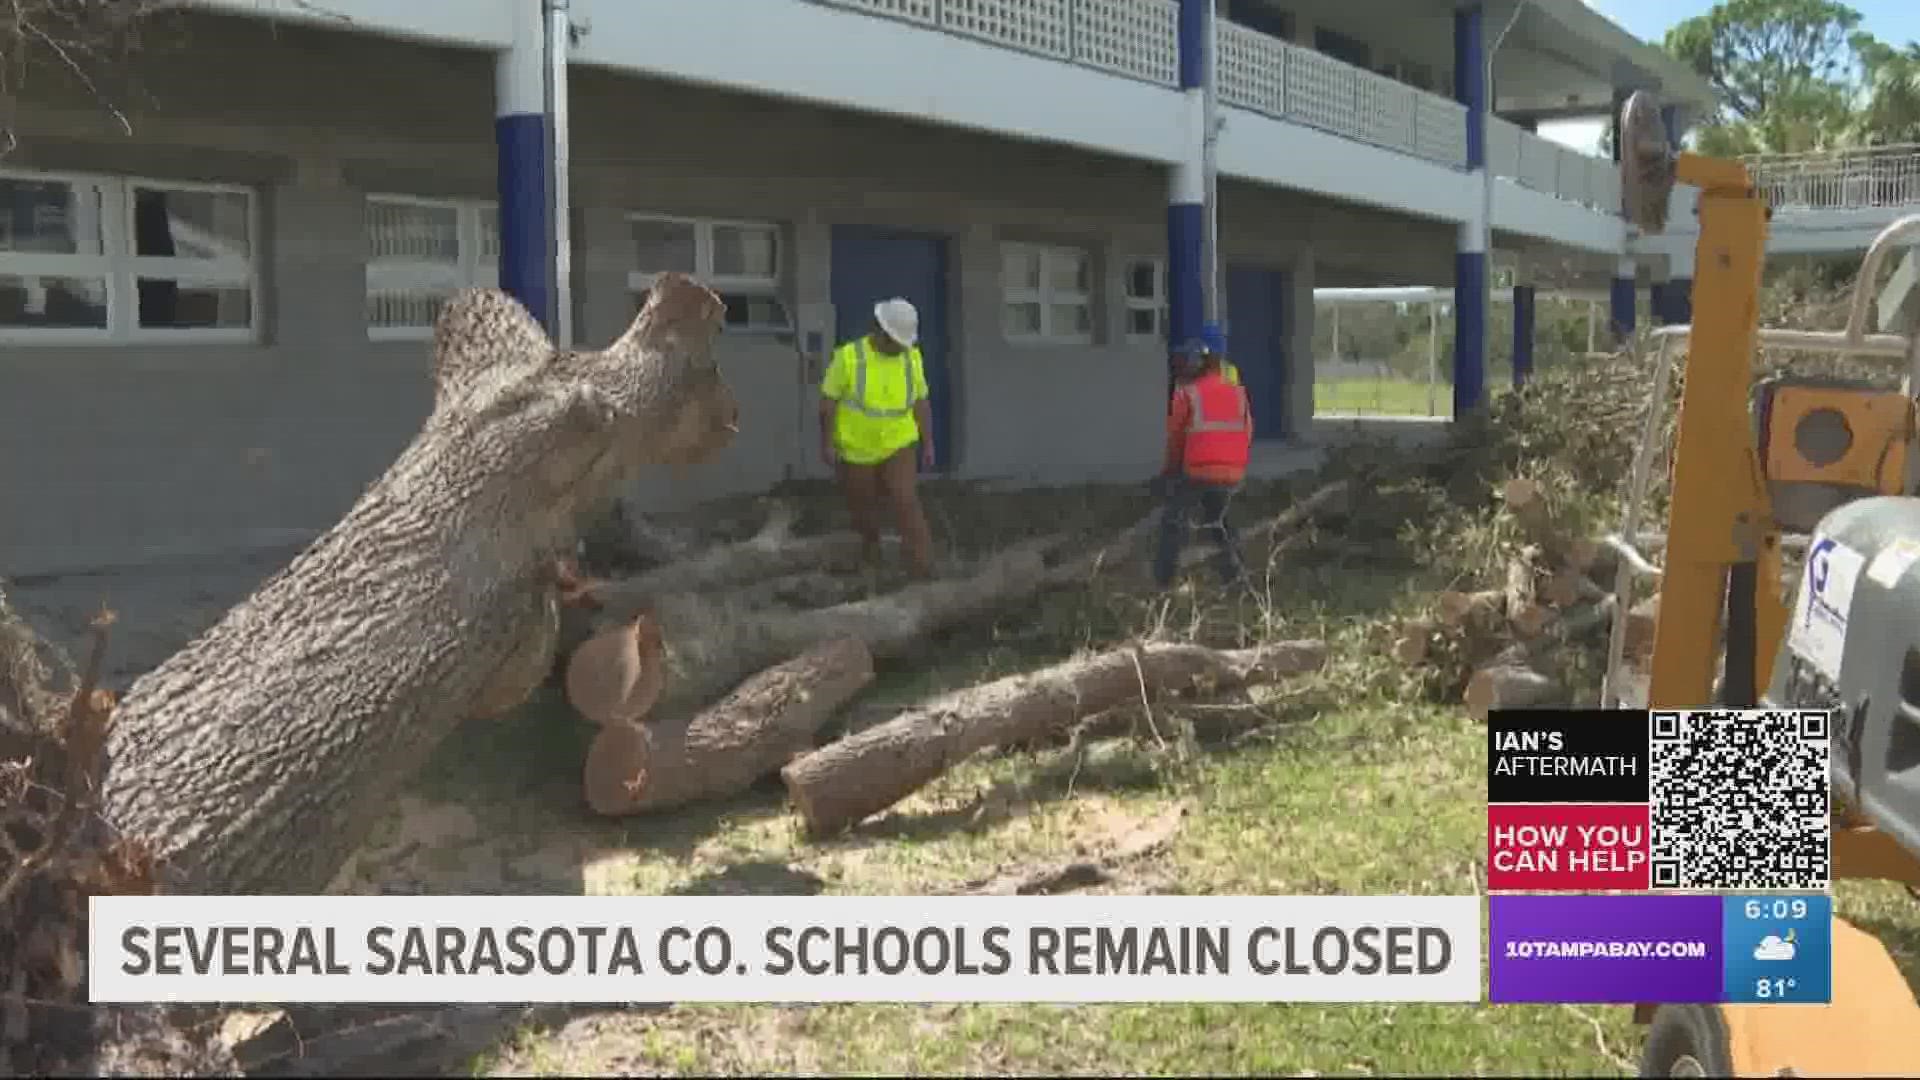 “We’ve been assessing our schools trying to figure out what all the damage is out there,” a school official said.